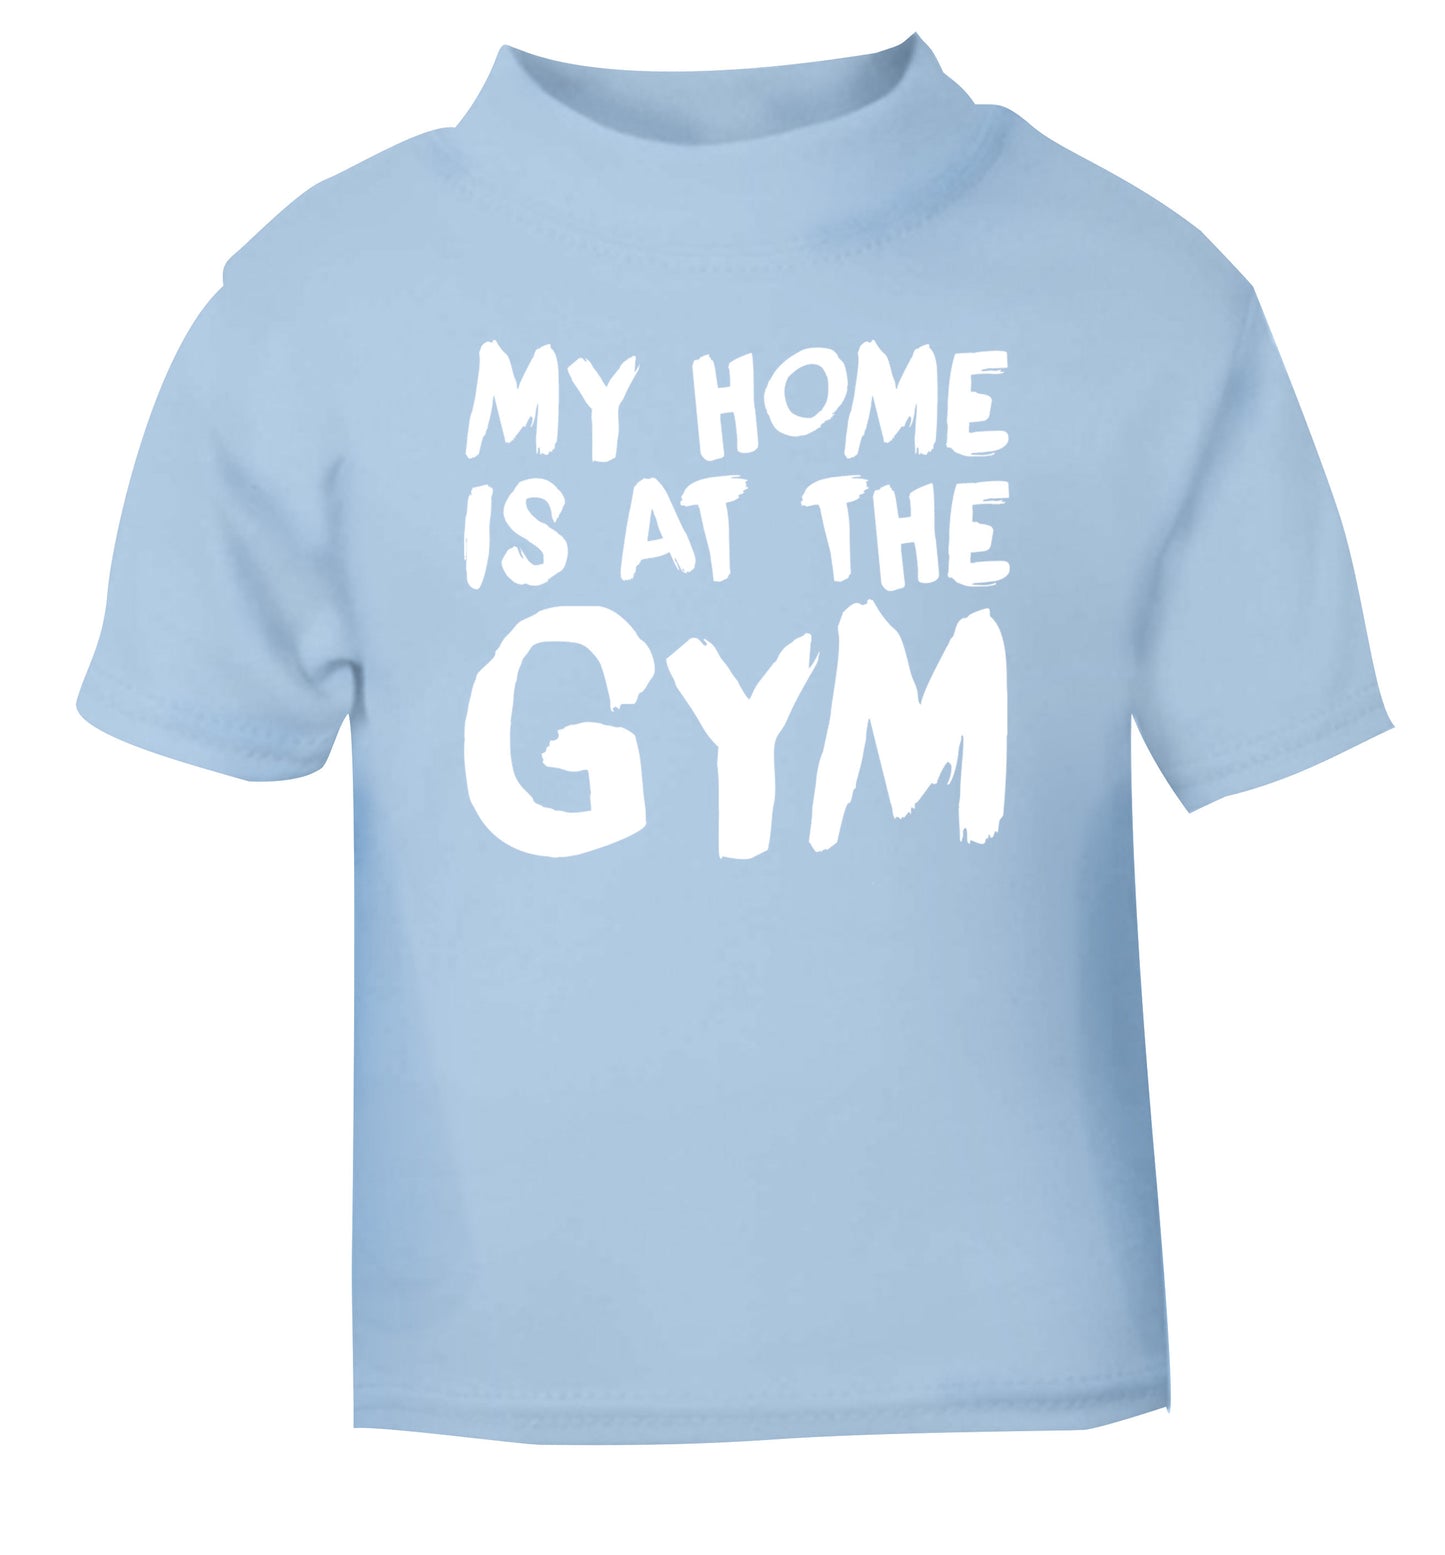 My home is at the gym light blue Baby Toddler Tshirt 2 Years